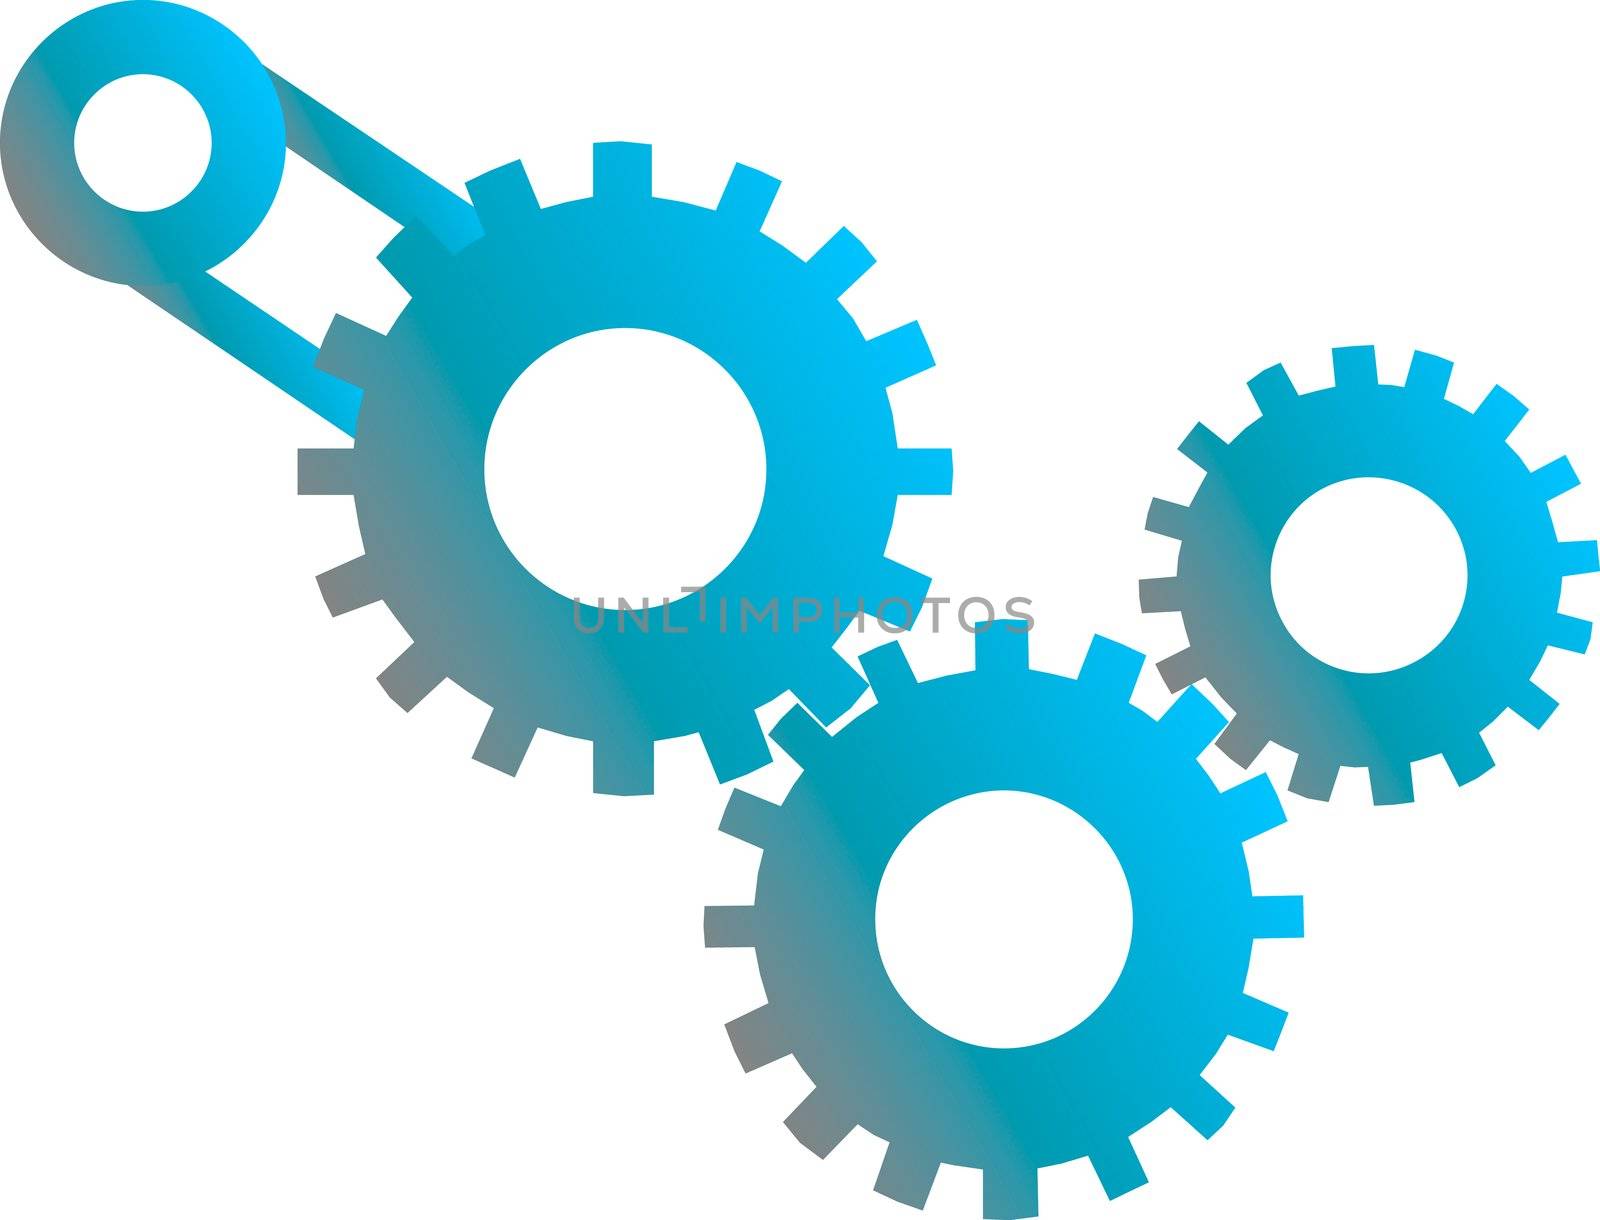 Abstract vector illustration of gears machinery